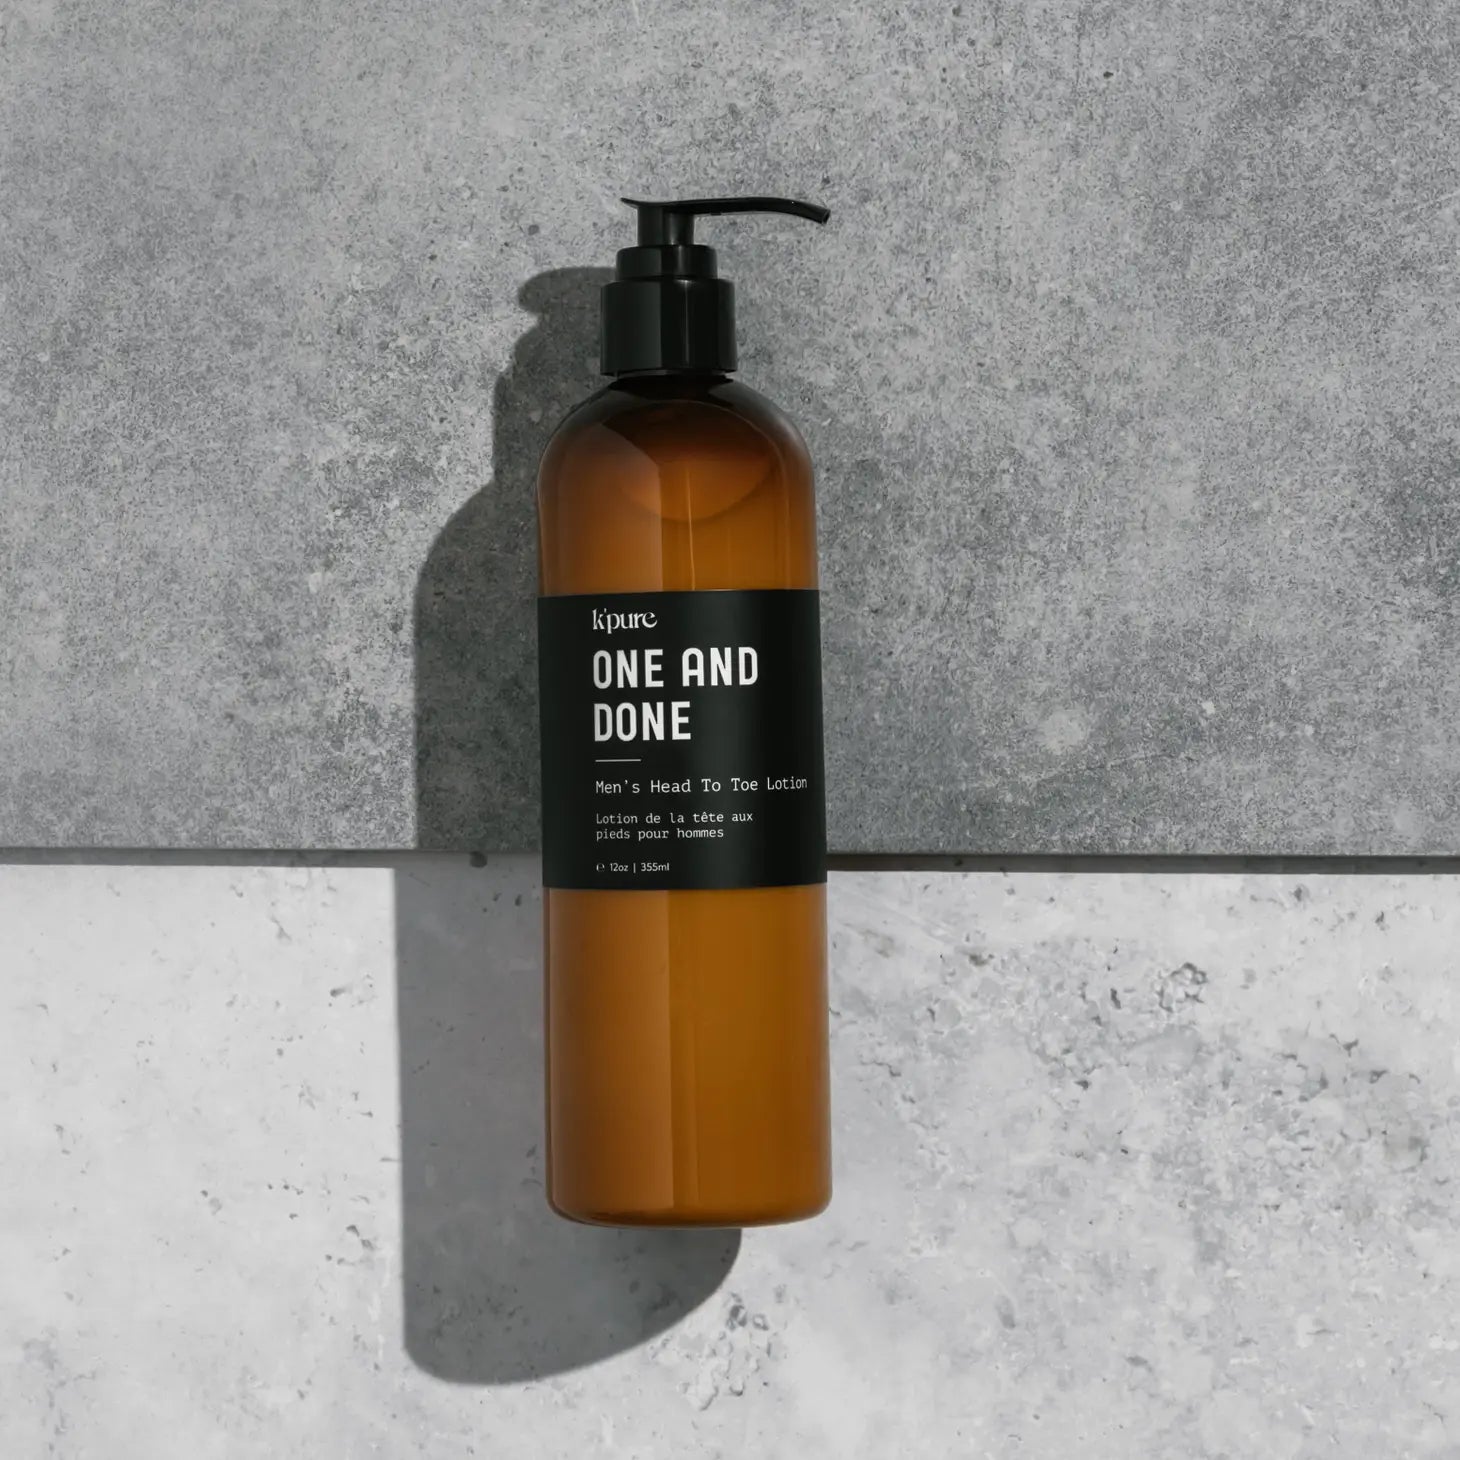 K’Pure Naturals - One and Done | Men's Head To Toe Lotion